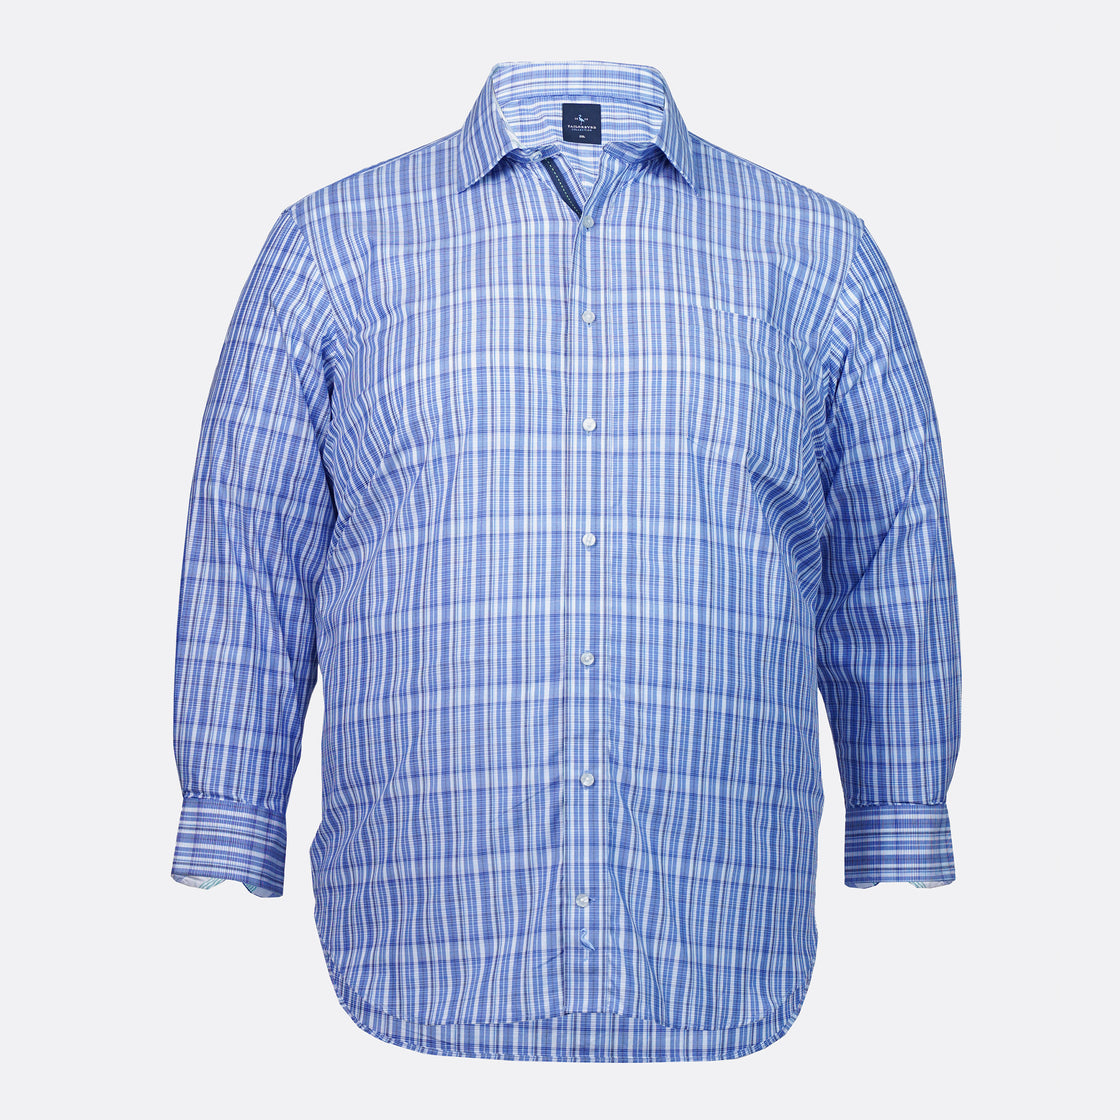 Tailorbyrd Checkered Shirt